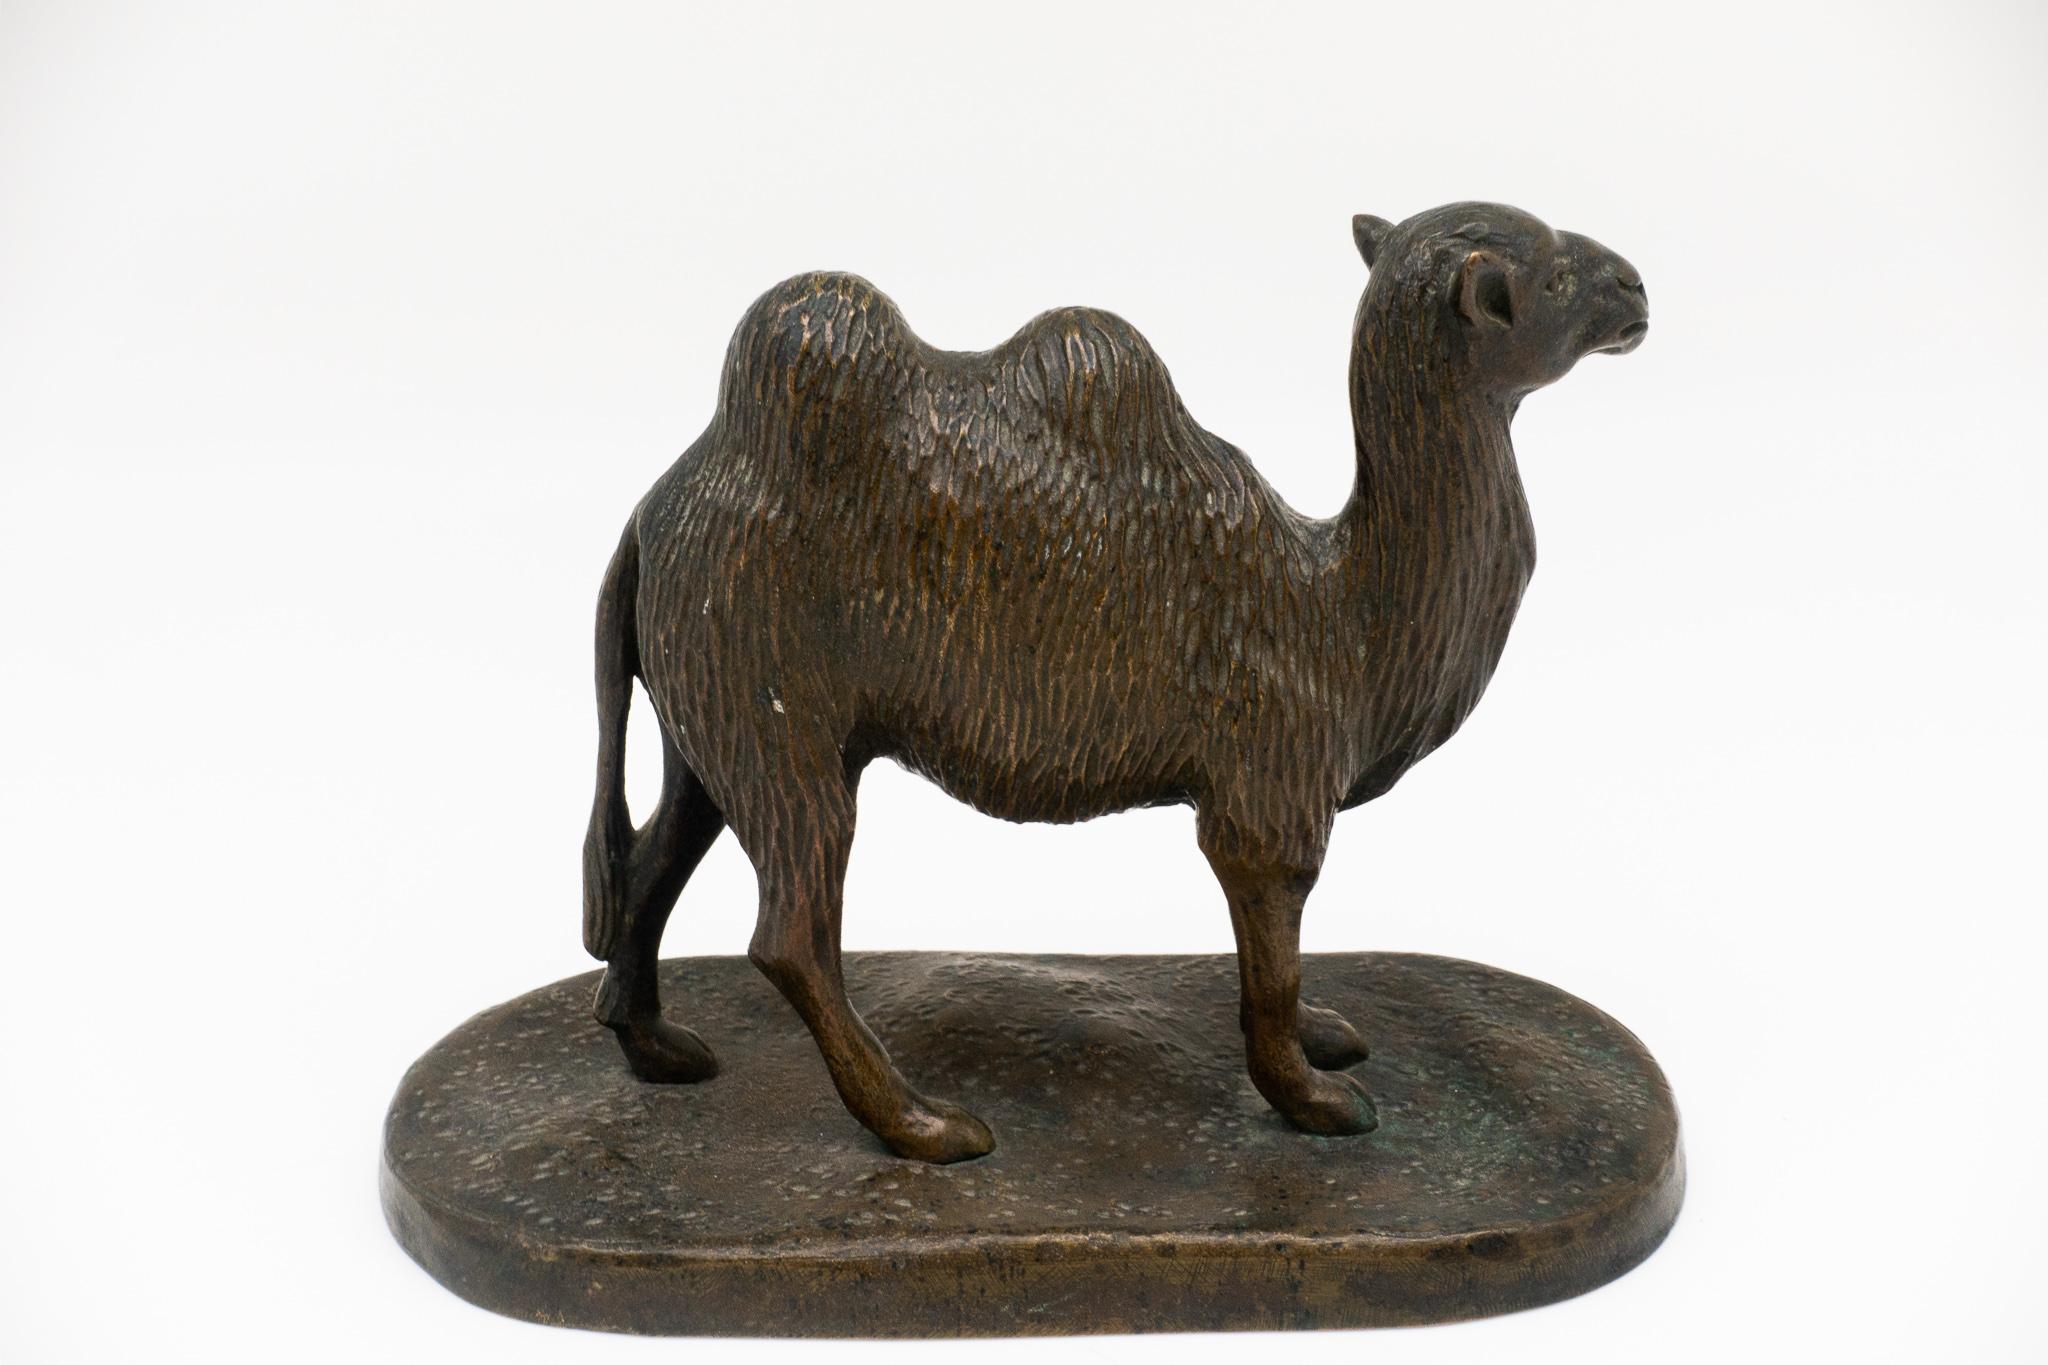 French bronze sculpture of Bactrian camel, 19th century.